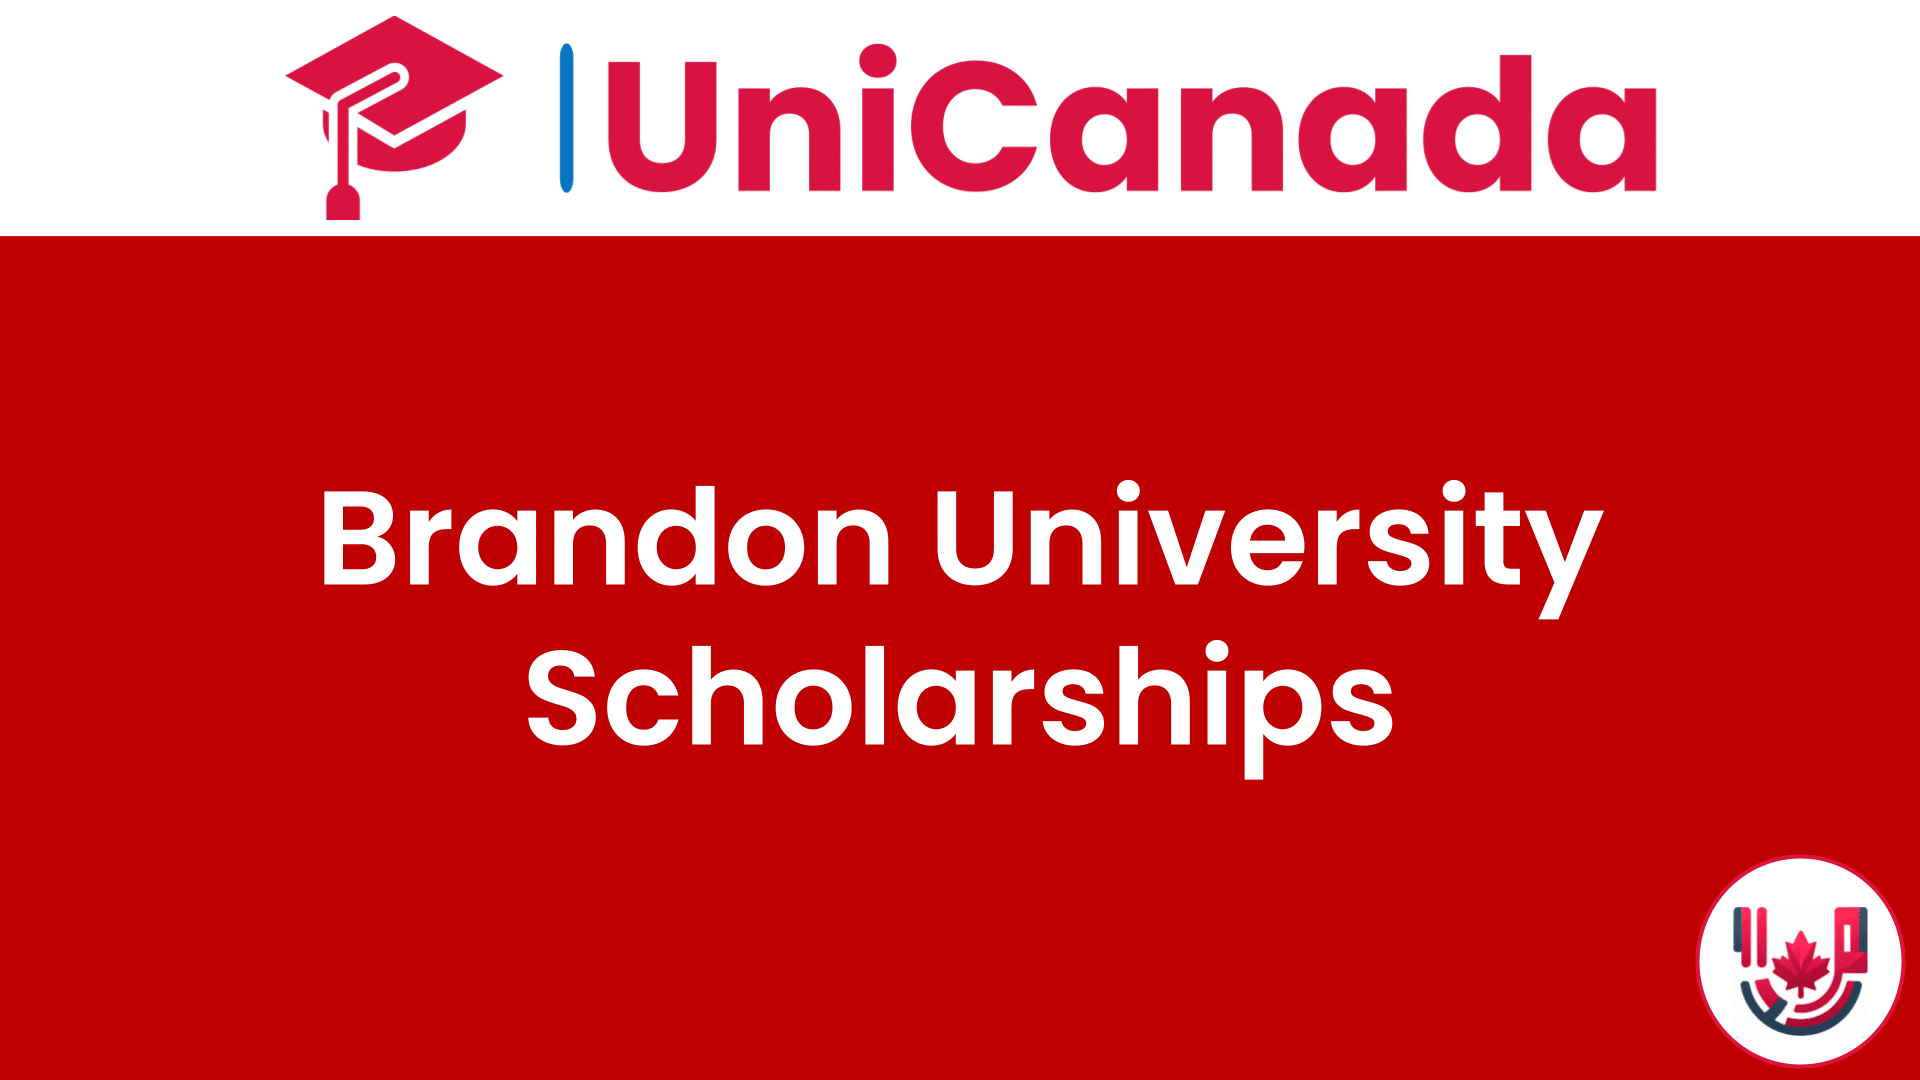 The 8 Brandon University Scholarships - Discover and apply